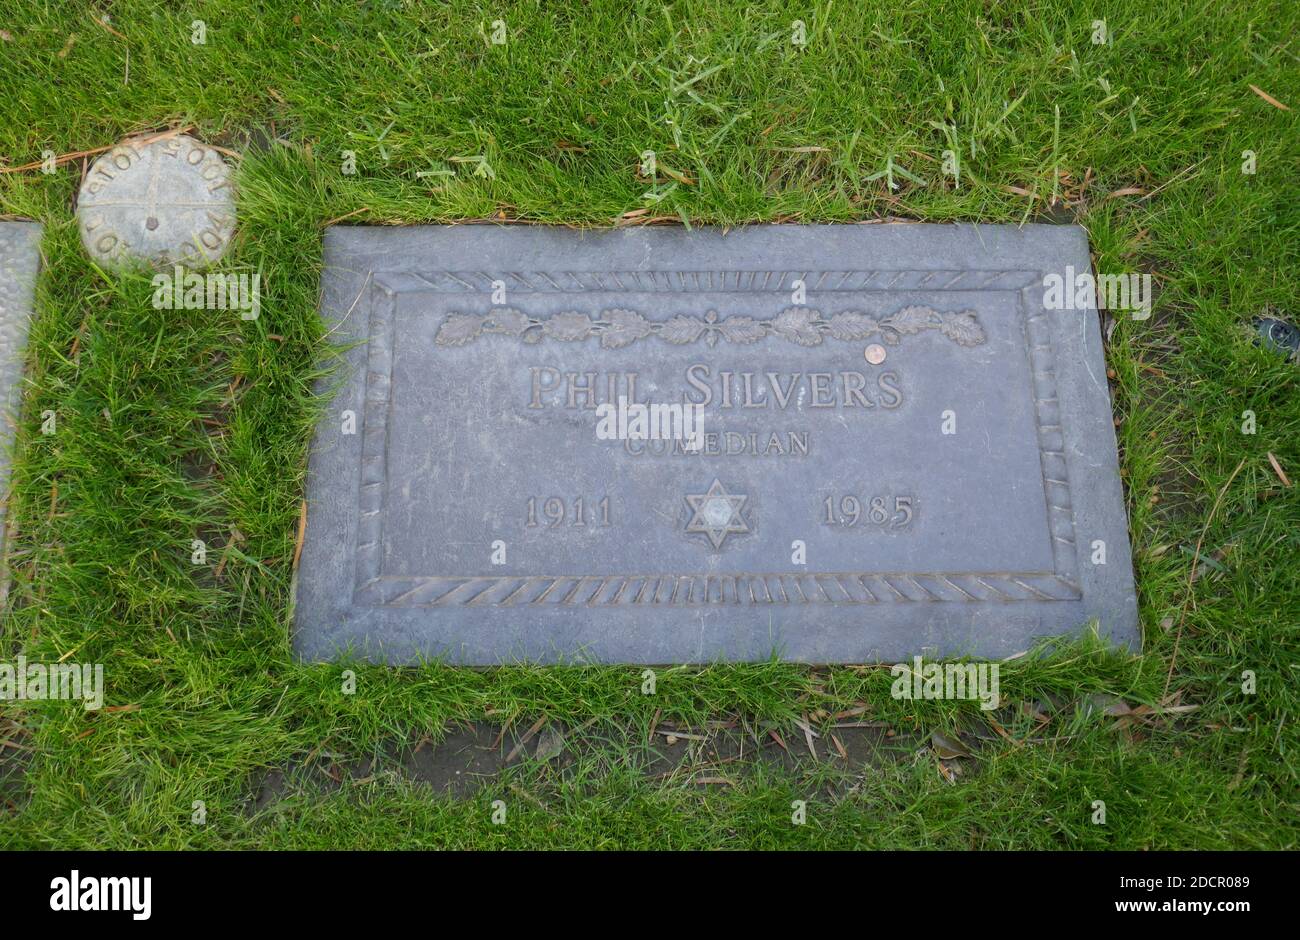 Los Angeles, California, USA 17th November 2020 A general view of atmosphere of comedian/actor Phil Silvers Grave at Mount Sinai Cemetery Hollywood Hills on November 17, 2020 in Los Angeles, California, USA. Photo by Barry King/Alamy Stock Photo Stock Photo